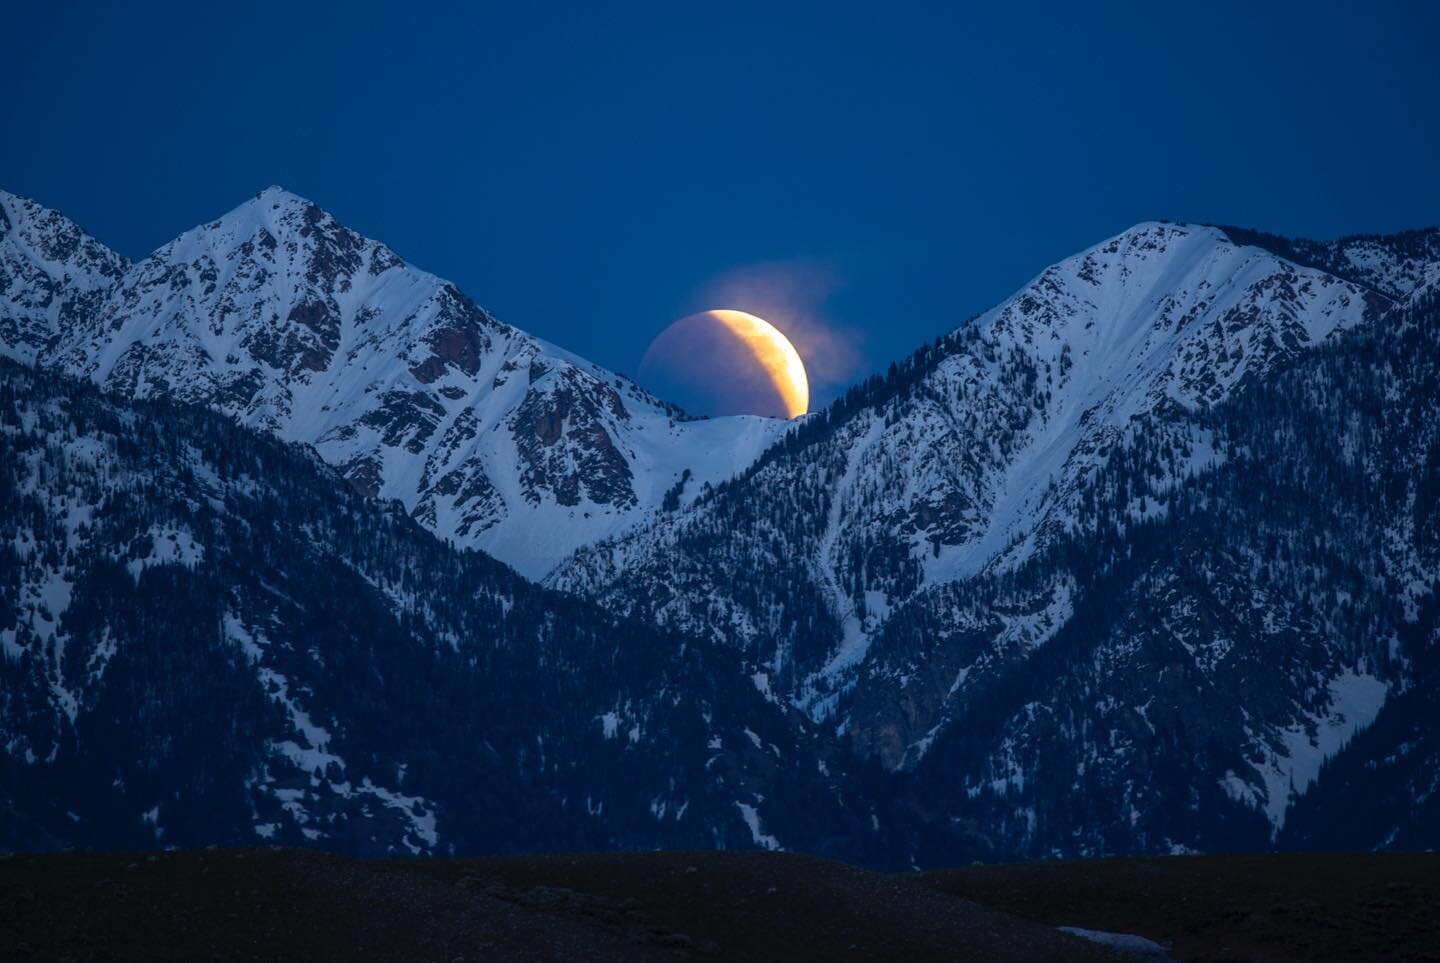 Got out camping for the lunar eclipse last night, here are some photos of it over the Madison range. Had low expectations since rain was in the forecast and it was hard to tell exactly where the moon would rise, but it all worked out perfectly! Skies